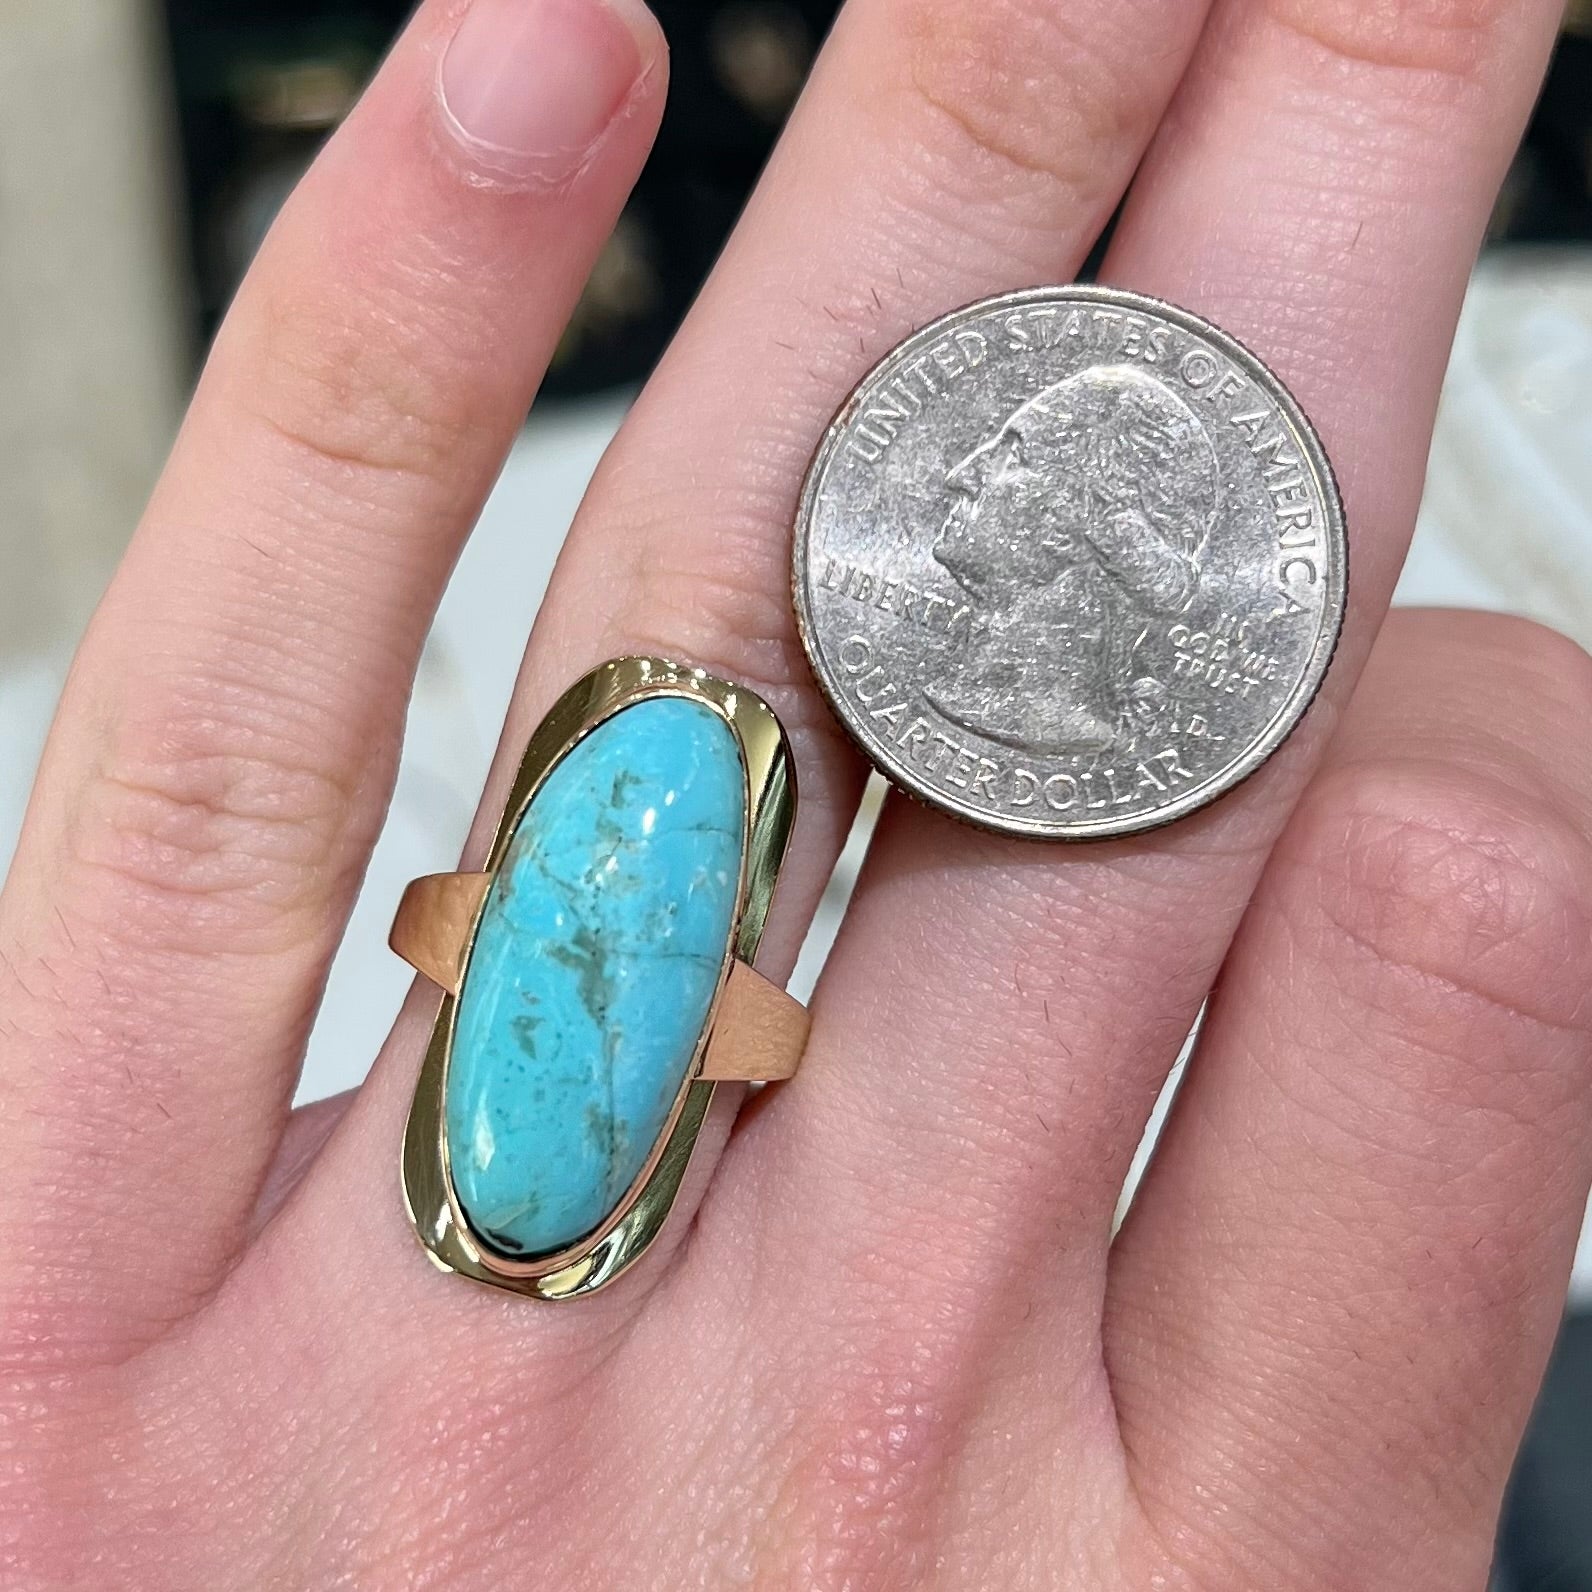 A Sleeping Beauty turquoise solitaire ring cast in 14kt yellow gold.